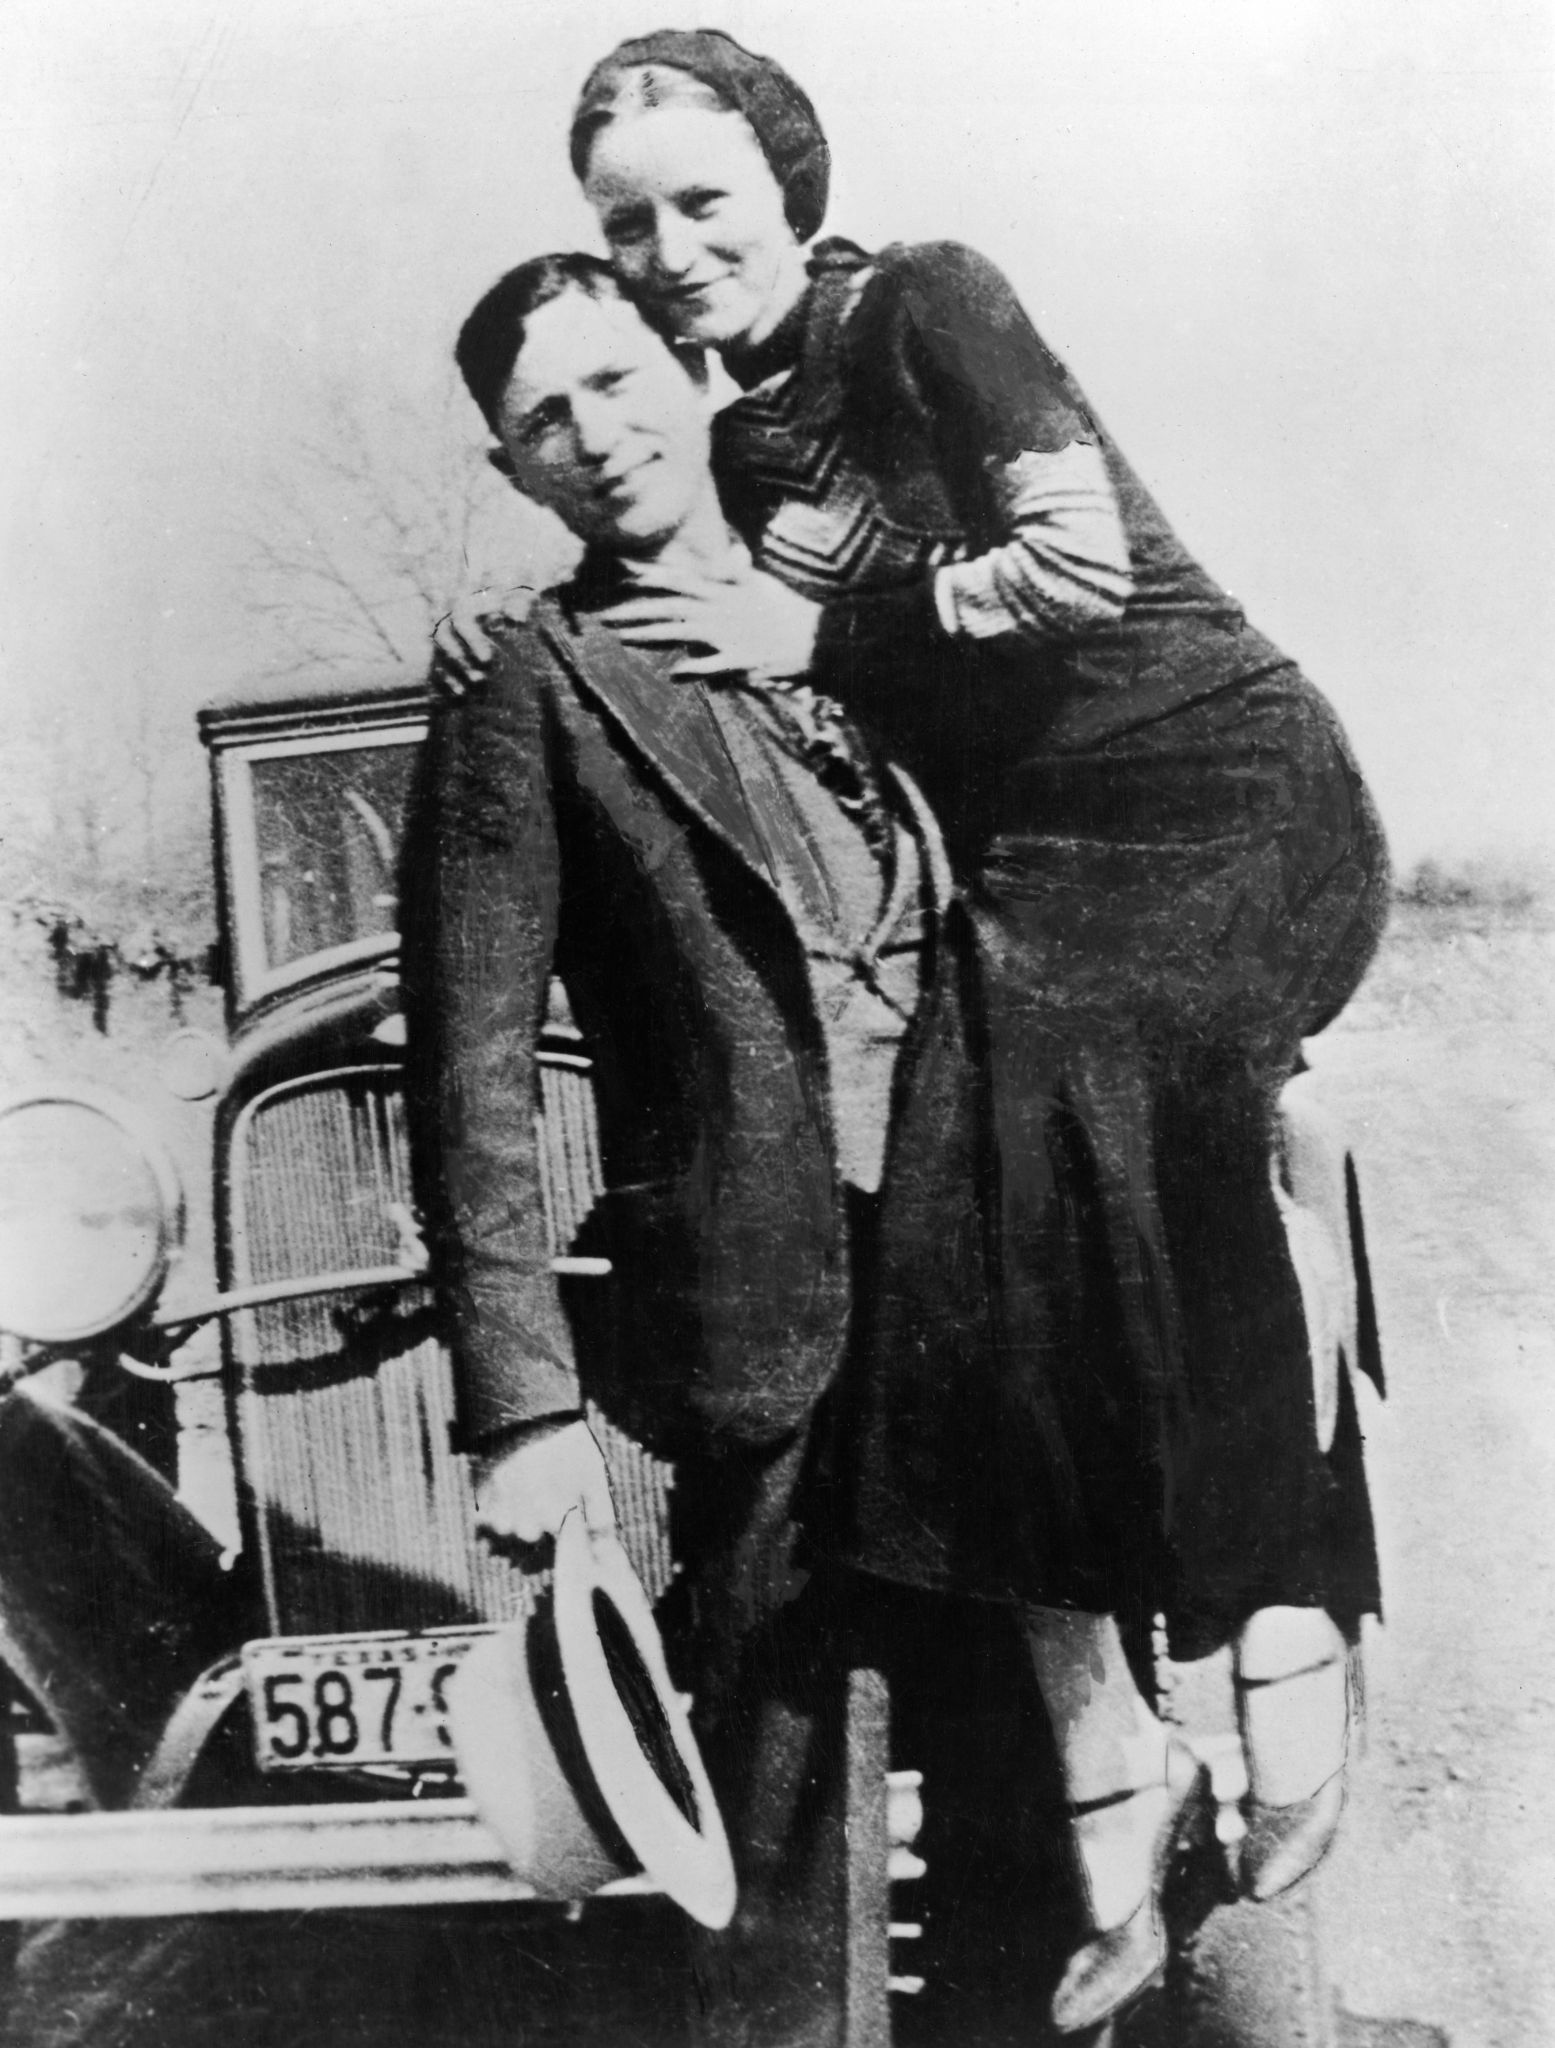 Original Bonnie And Clyde Indictments Uncovered In Old Tarrant County